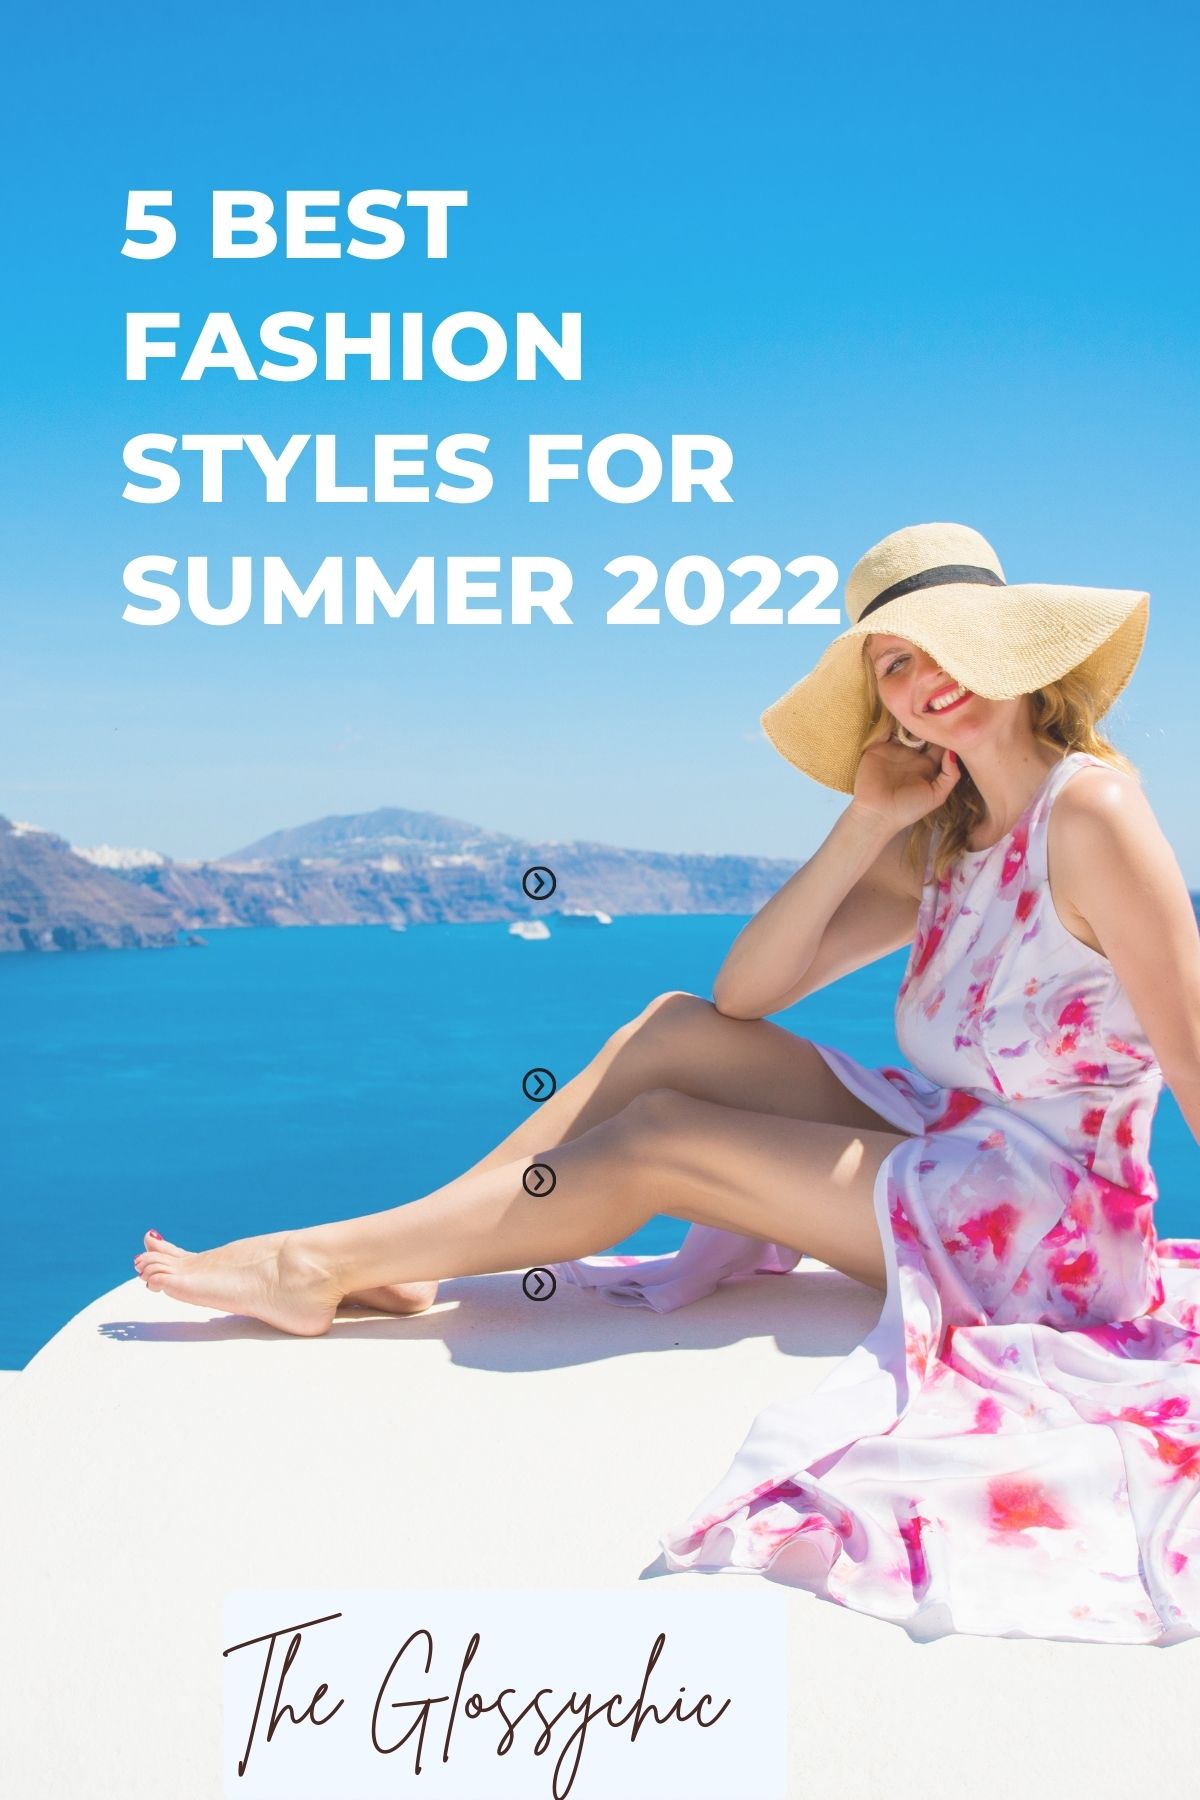 5 Best Fashion Styles For Summer 2022